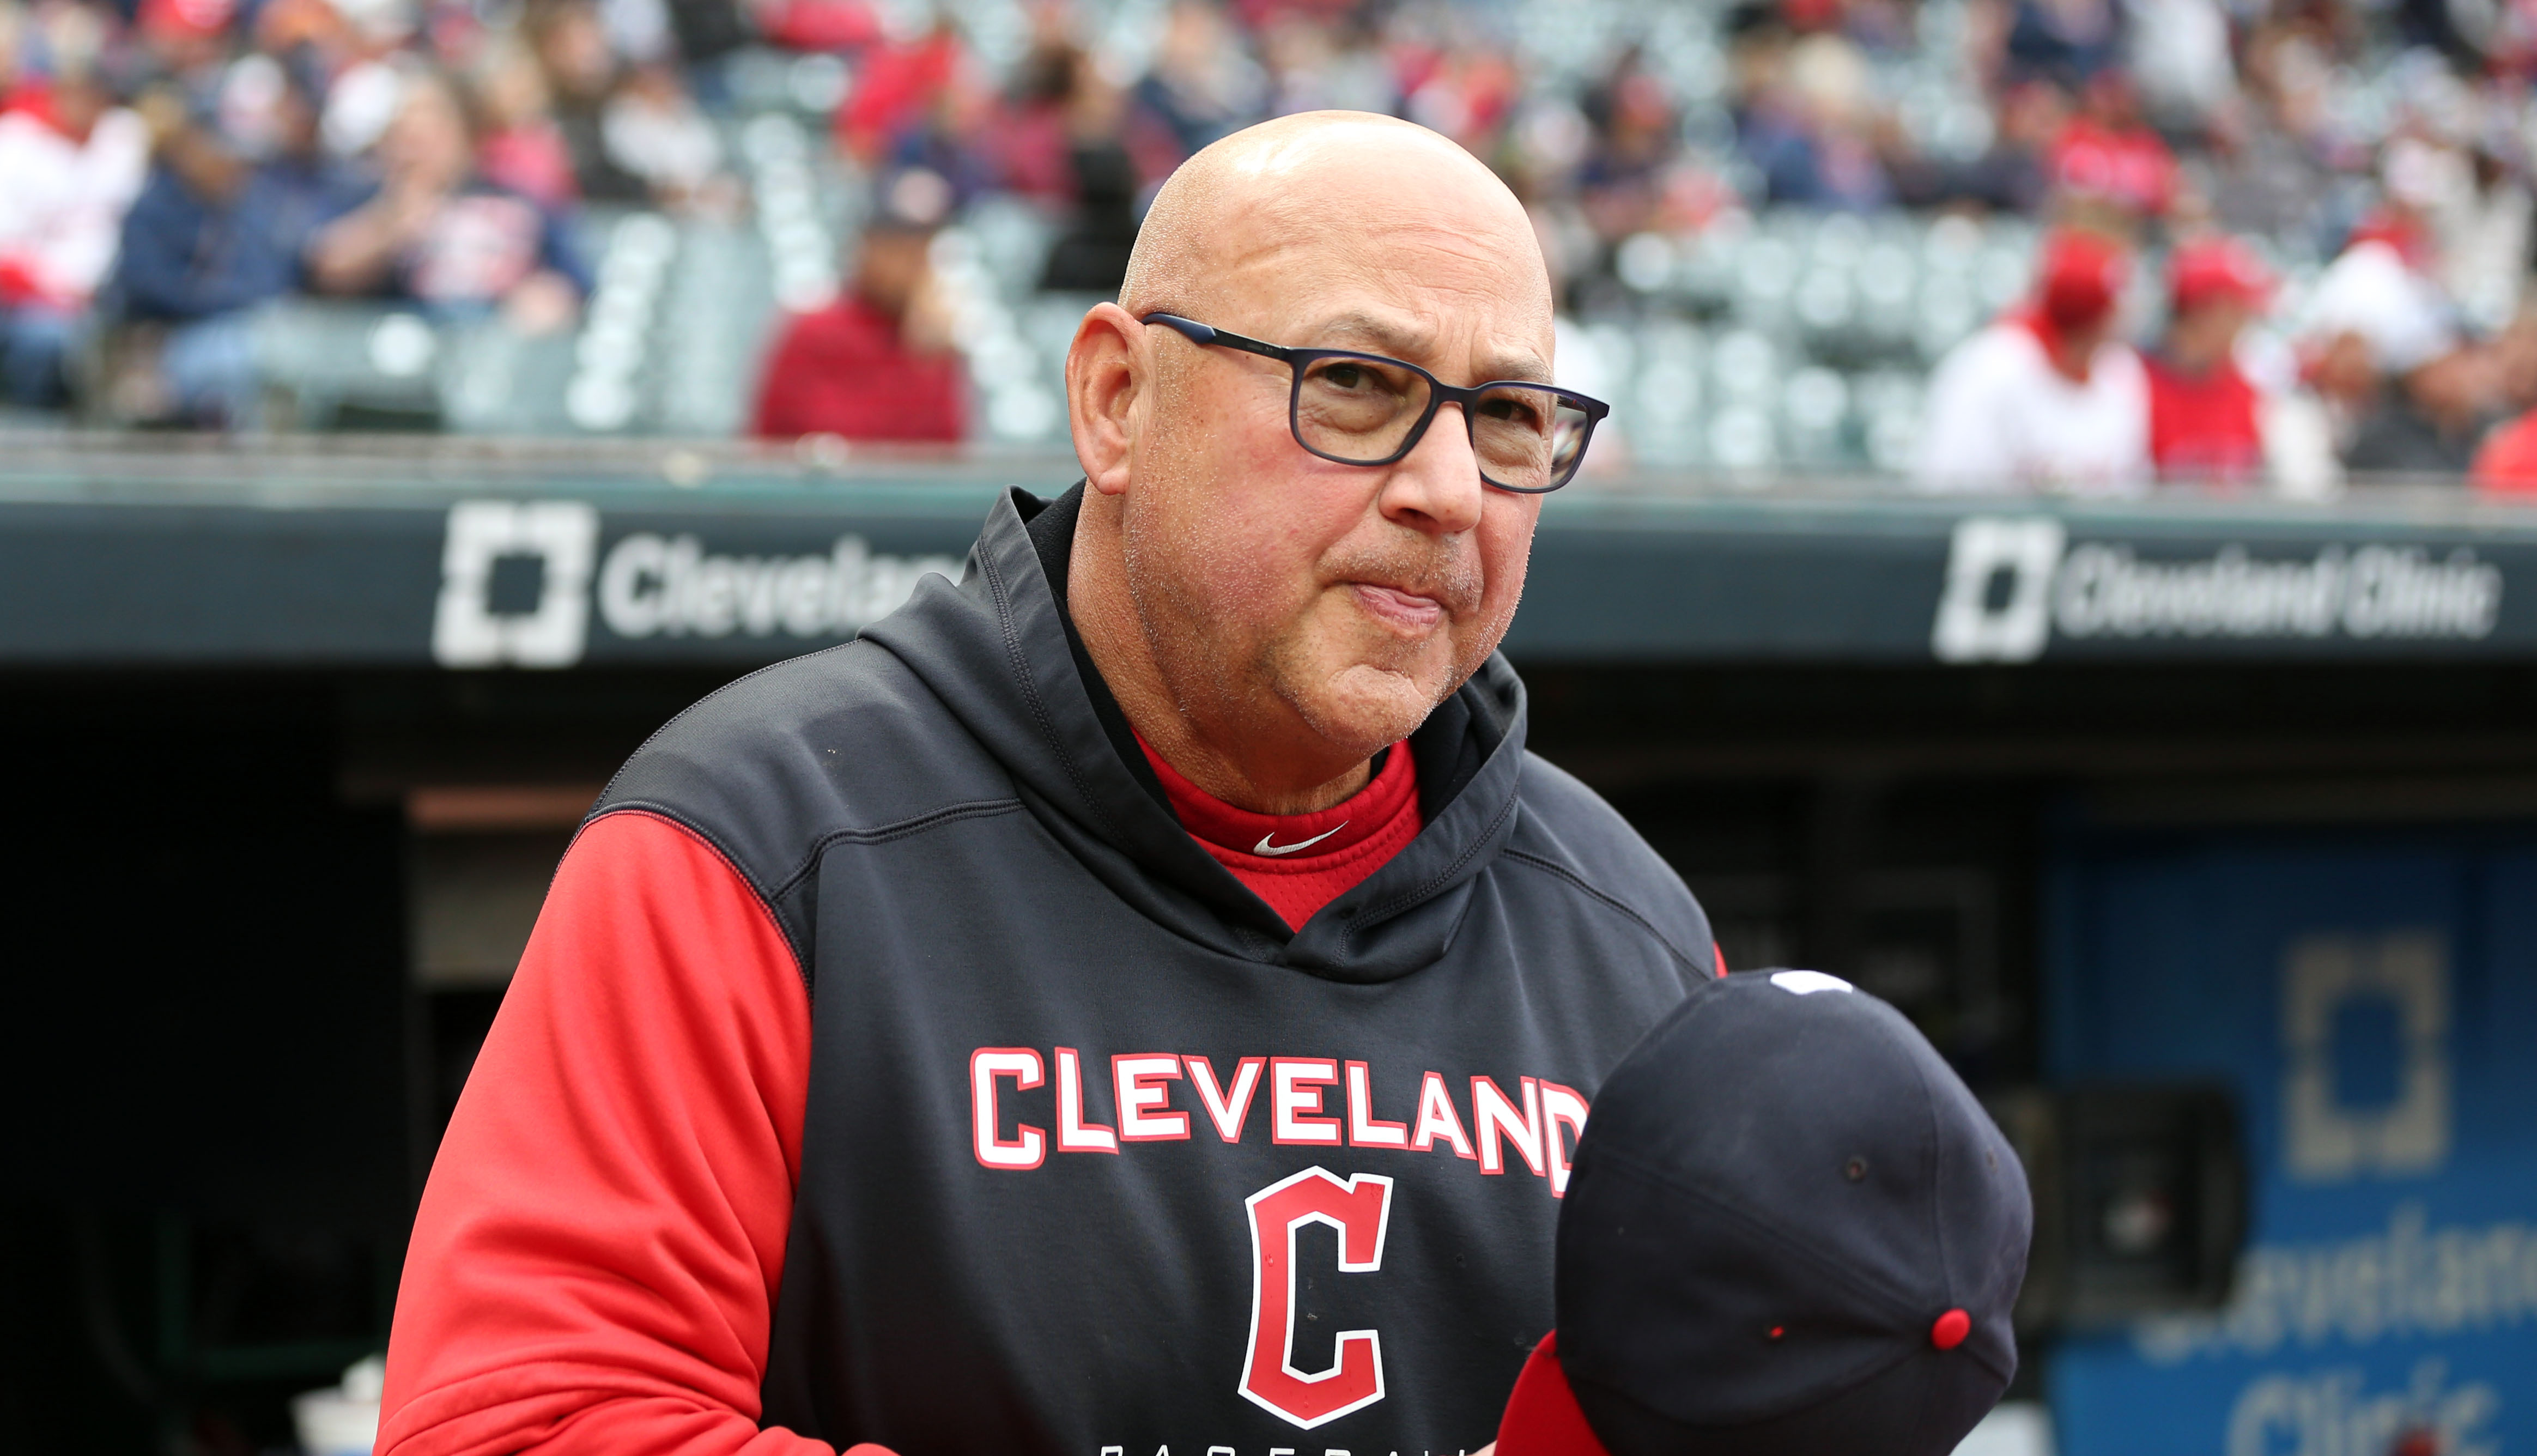 One of game's characters, Guardians manager Terry Francona set to end  career defined by class, touch